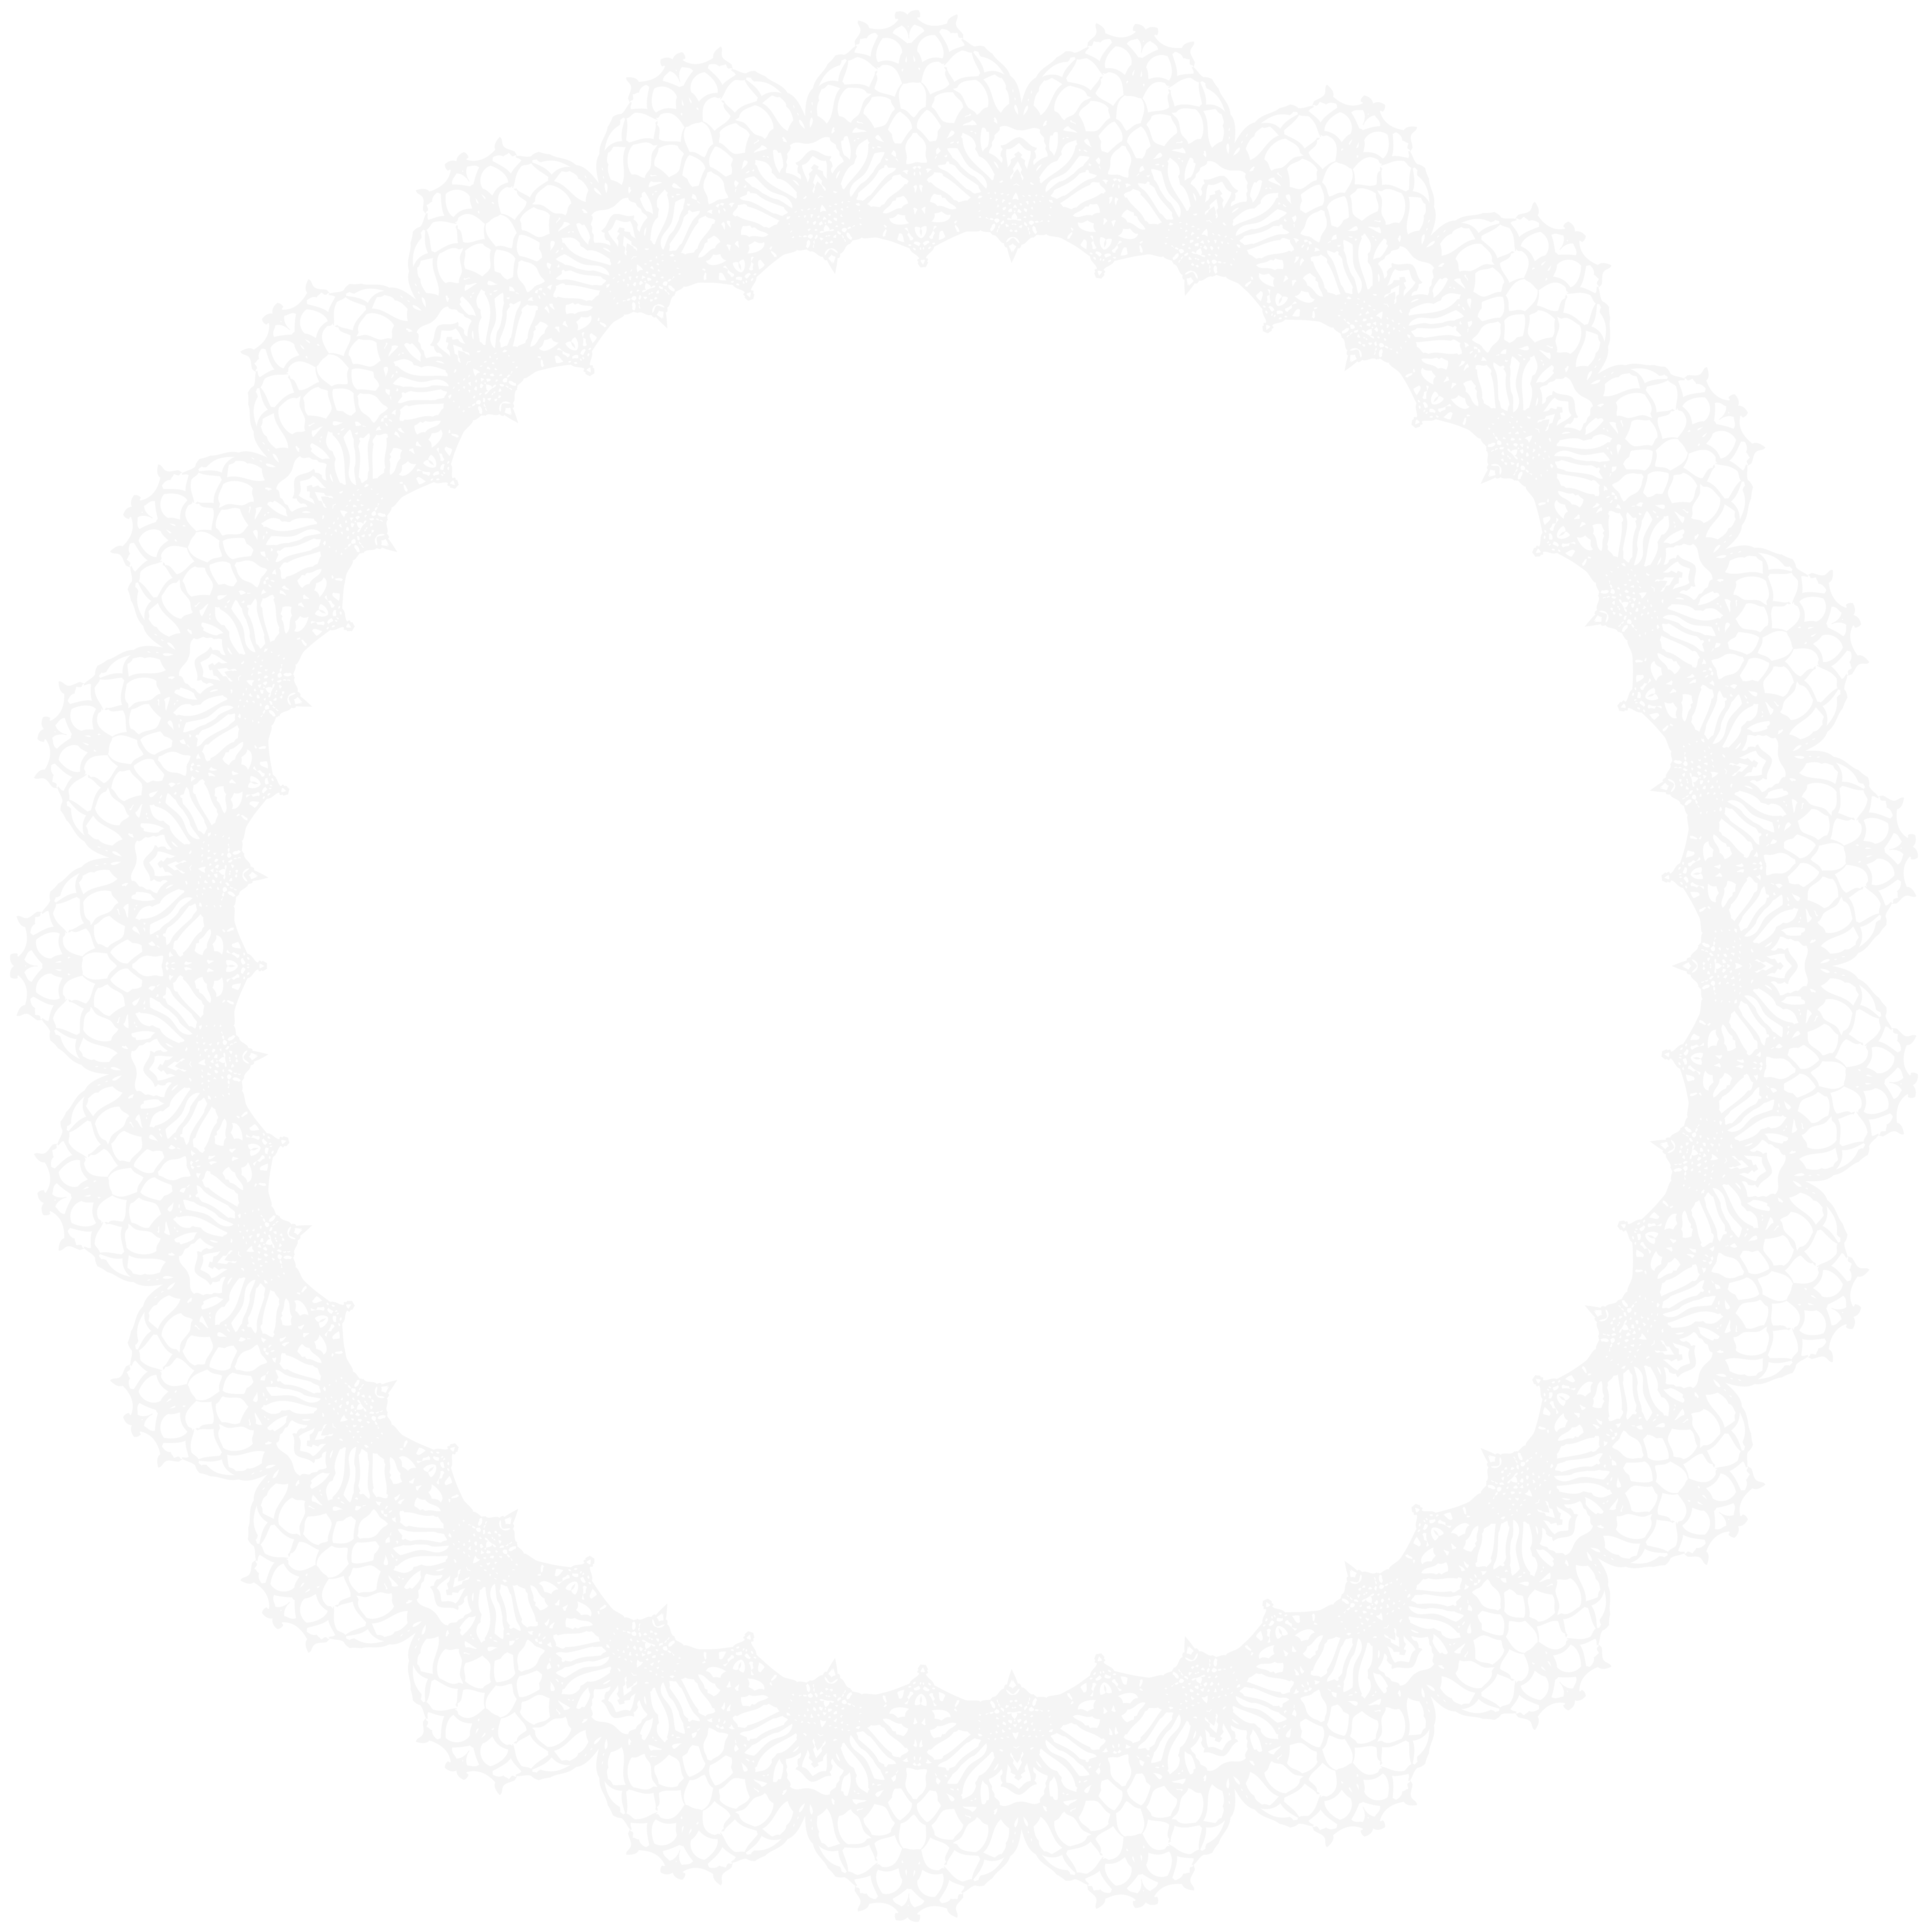 Free lace Clipart Images